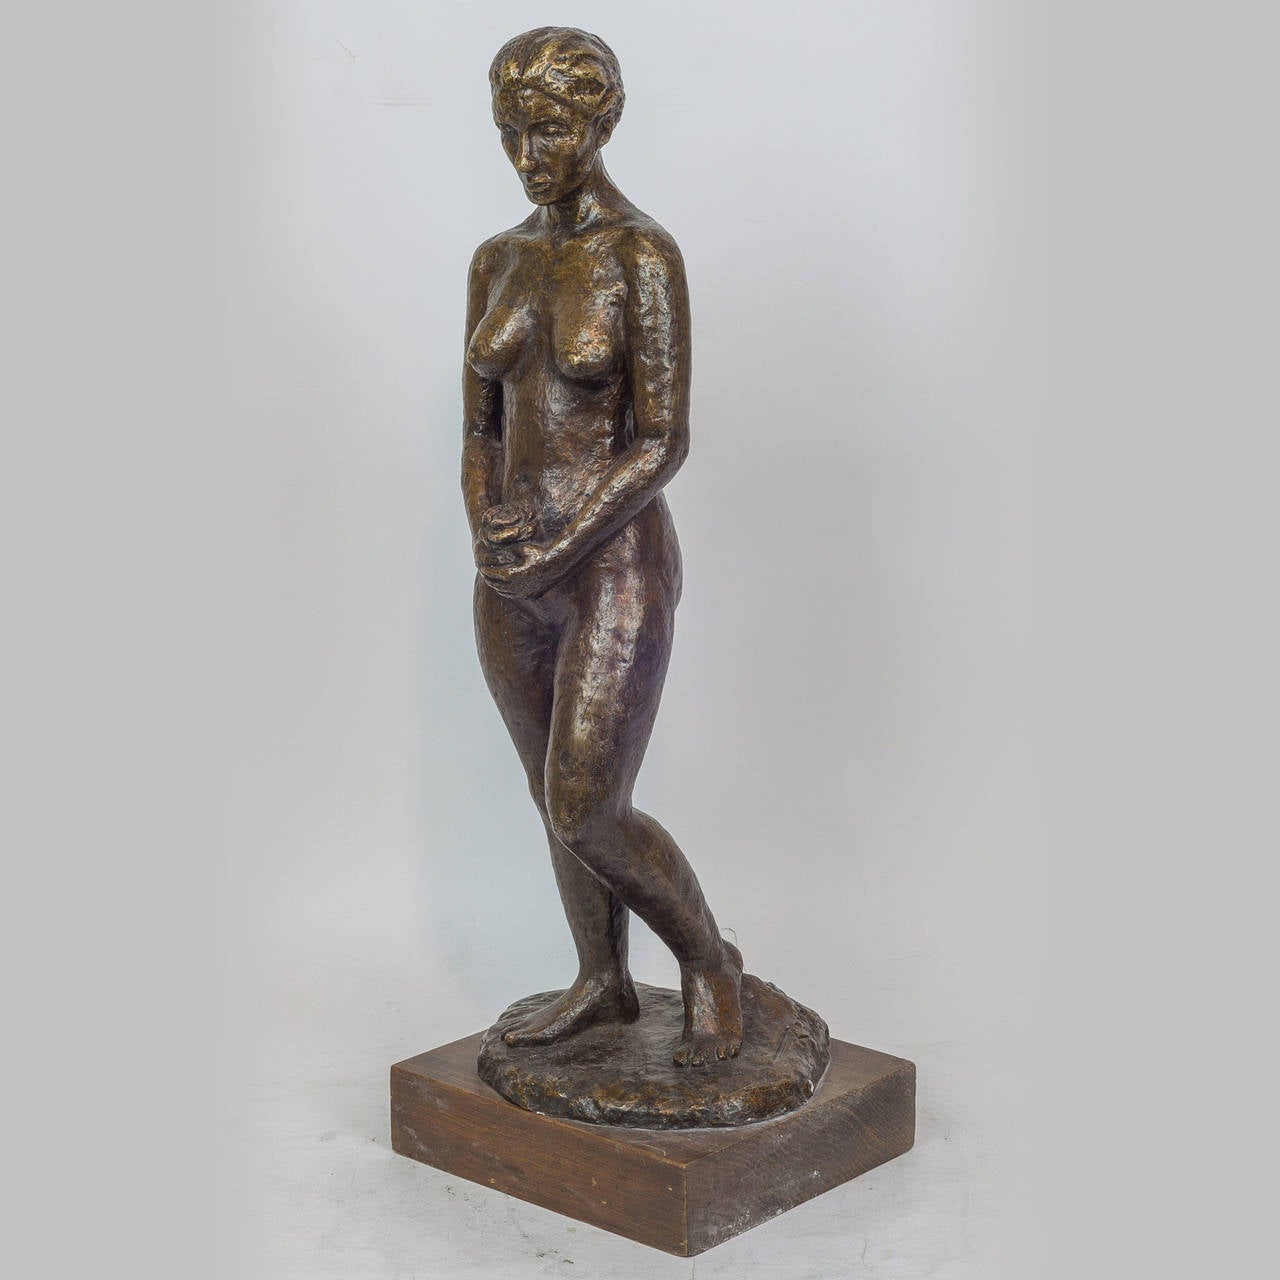 Patinated Bronze Figure of a Standing Nude Holding Flowers
Illegible Signature
Stock Number: SC86